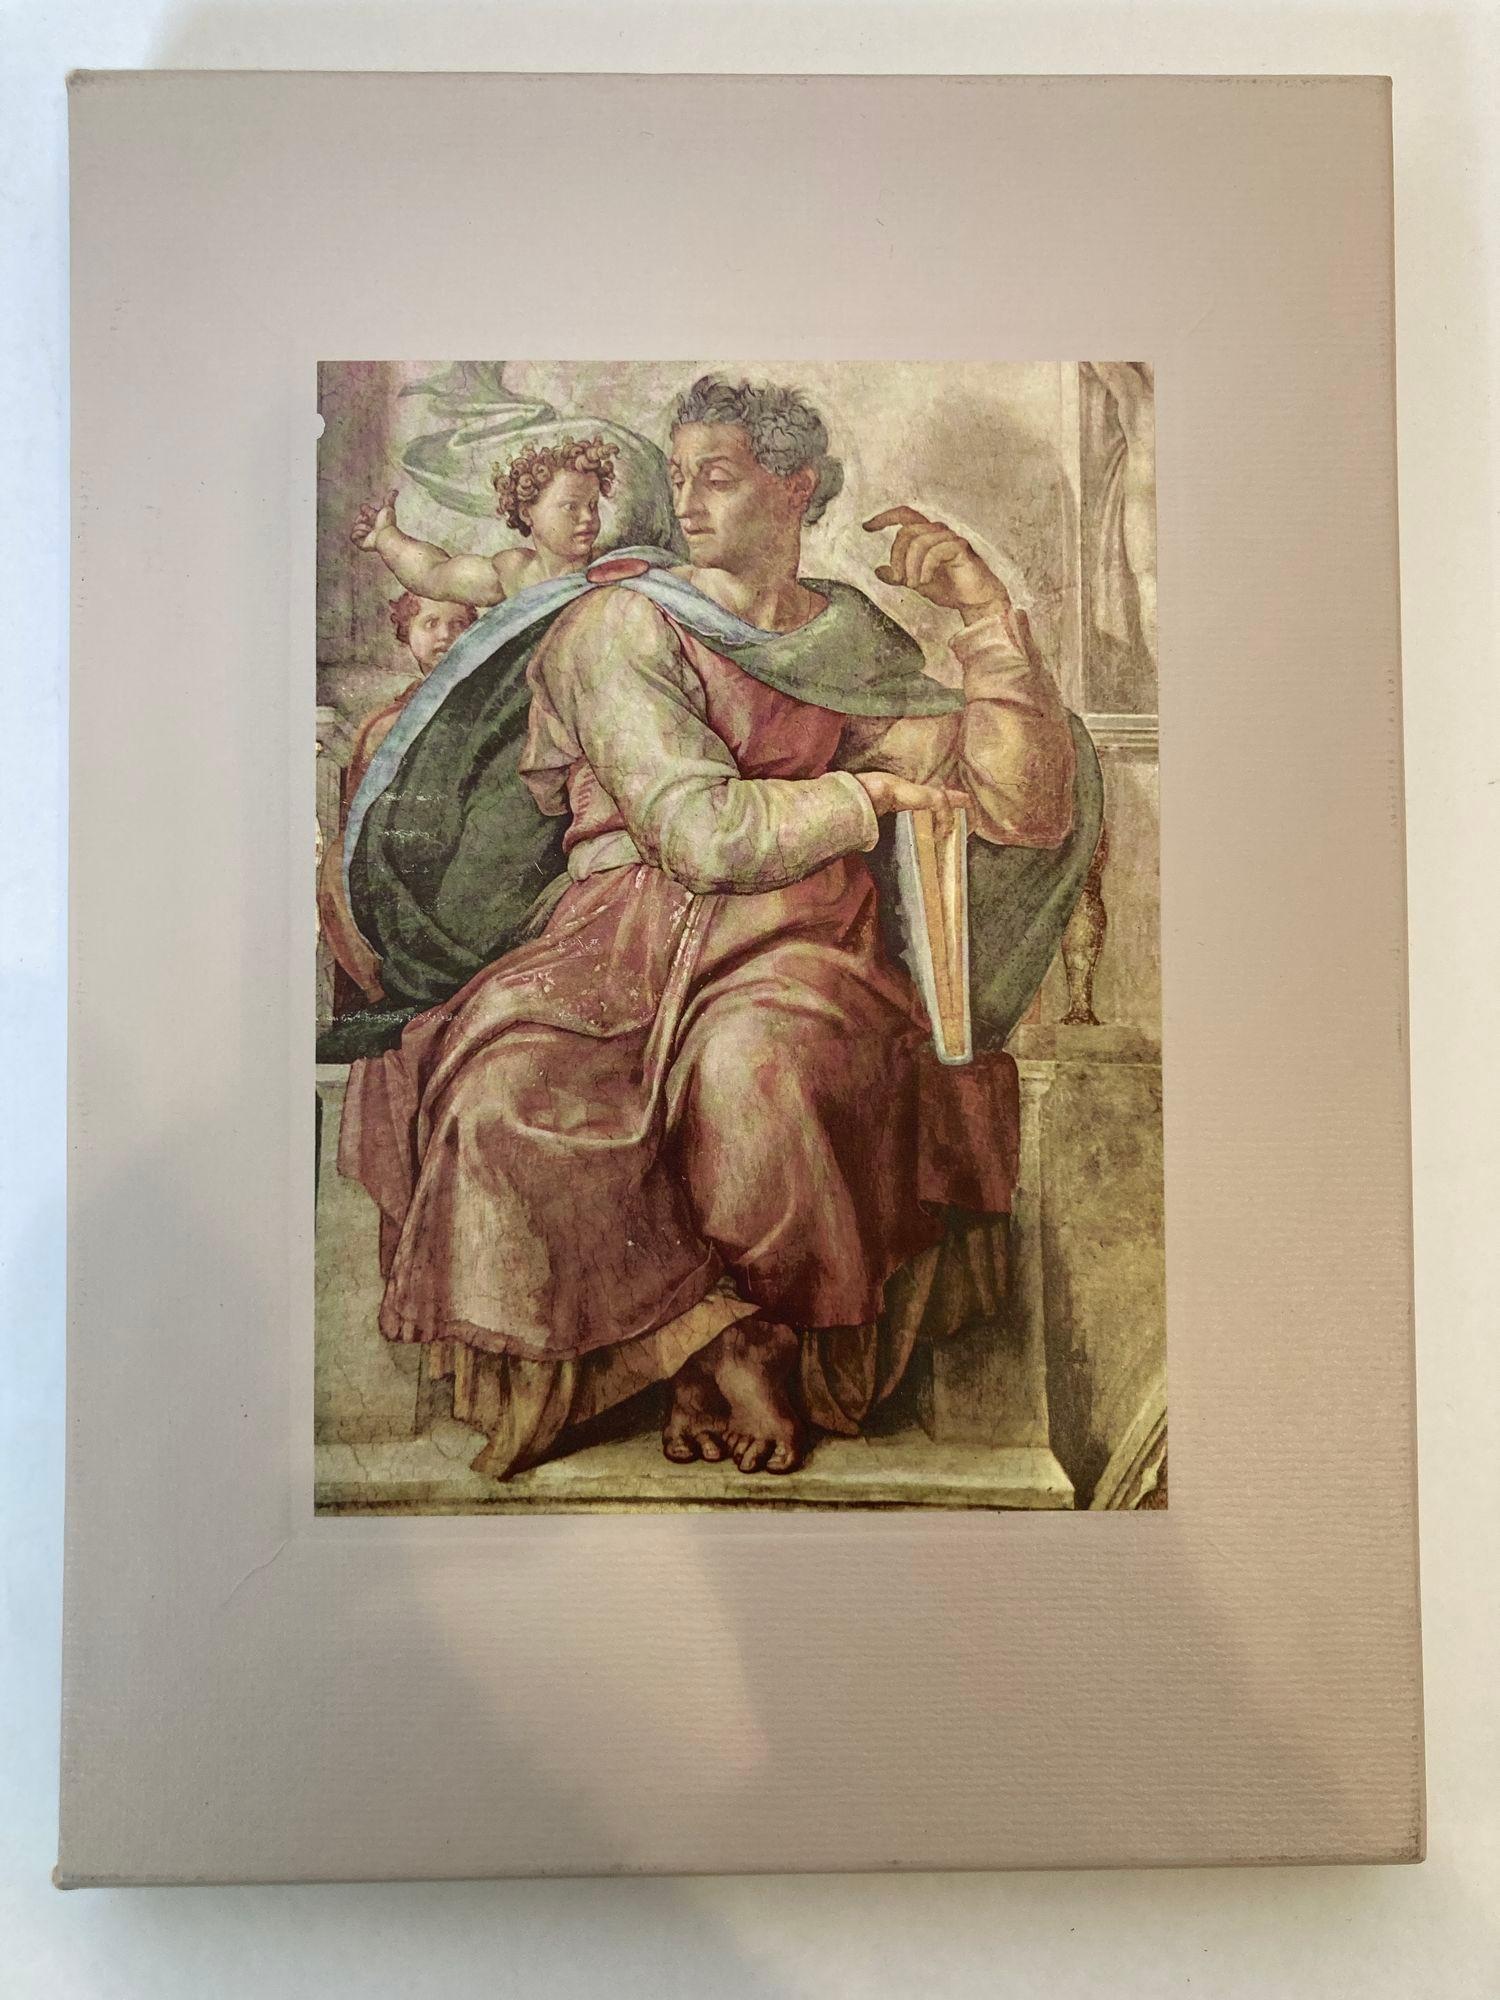 Classical Roman World of Michelangelo 1475-1564 by Robert Coughlan Book For Sale